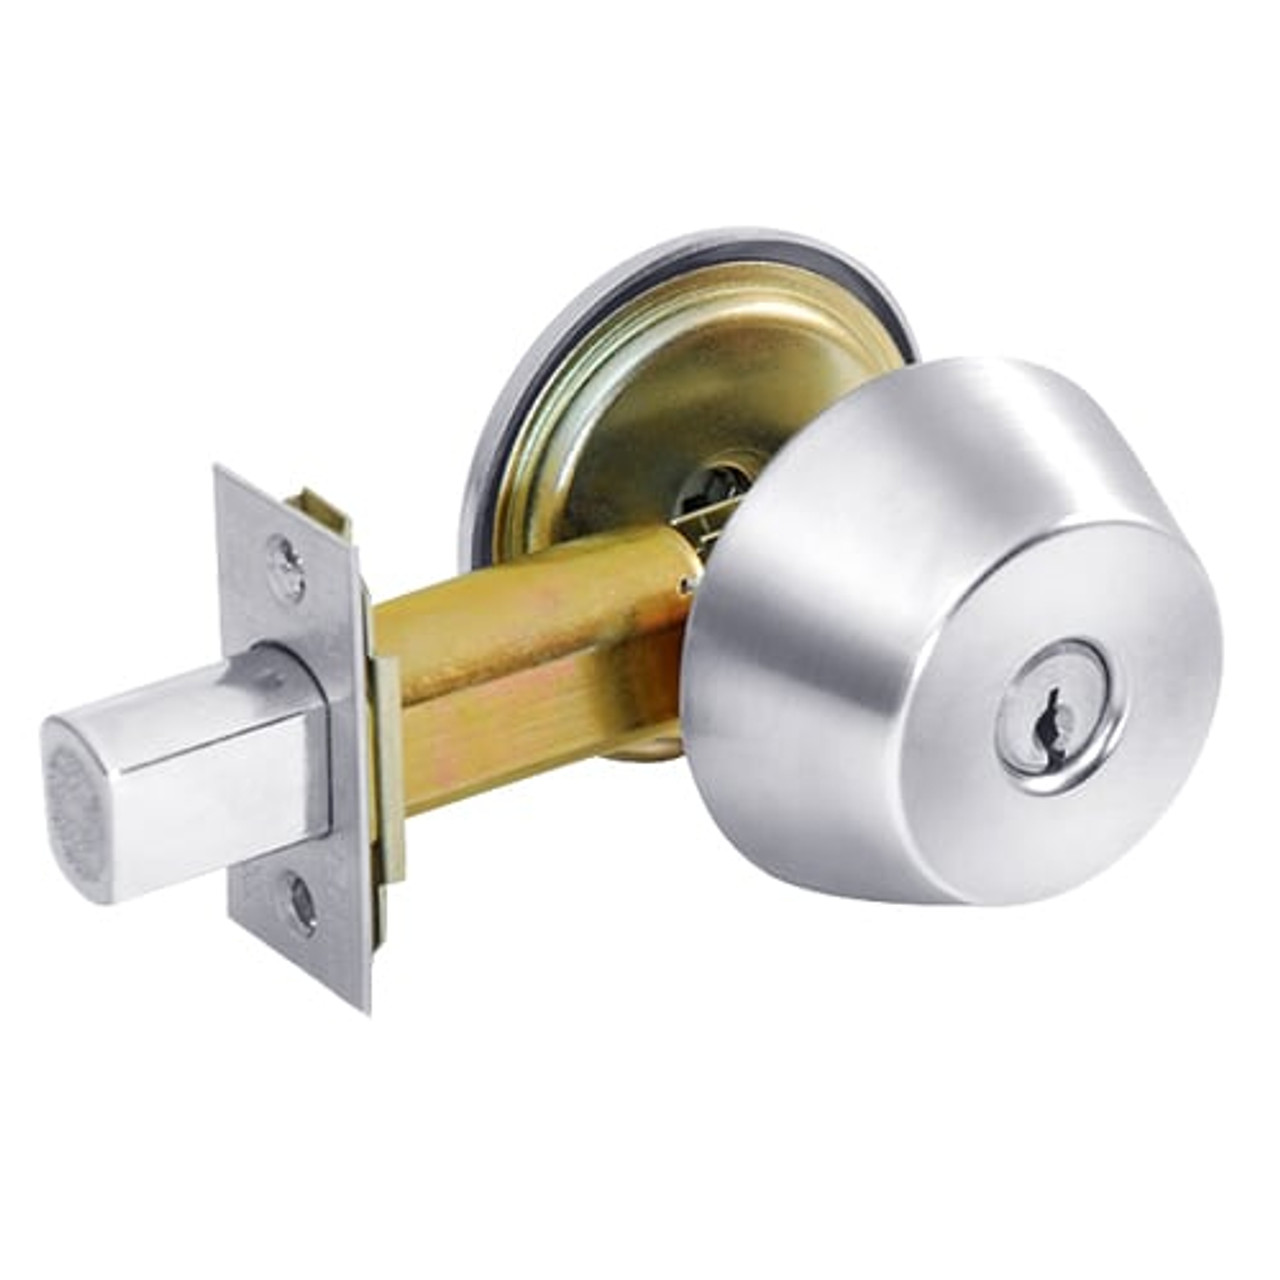 DL2213-625 Corbin DL2200 Series Cylindrical Deadlocks with Single Cylinder in Bright Chrome Finish